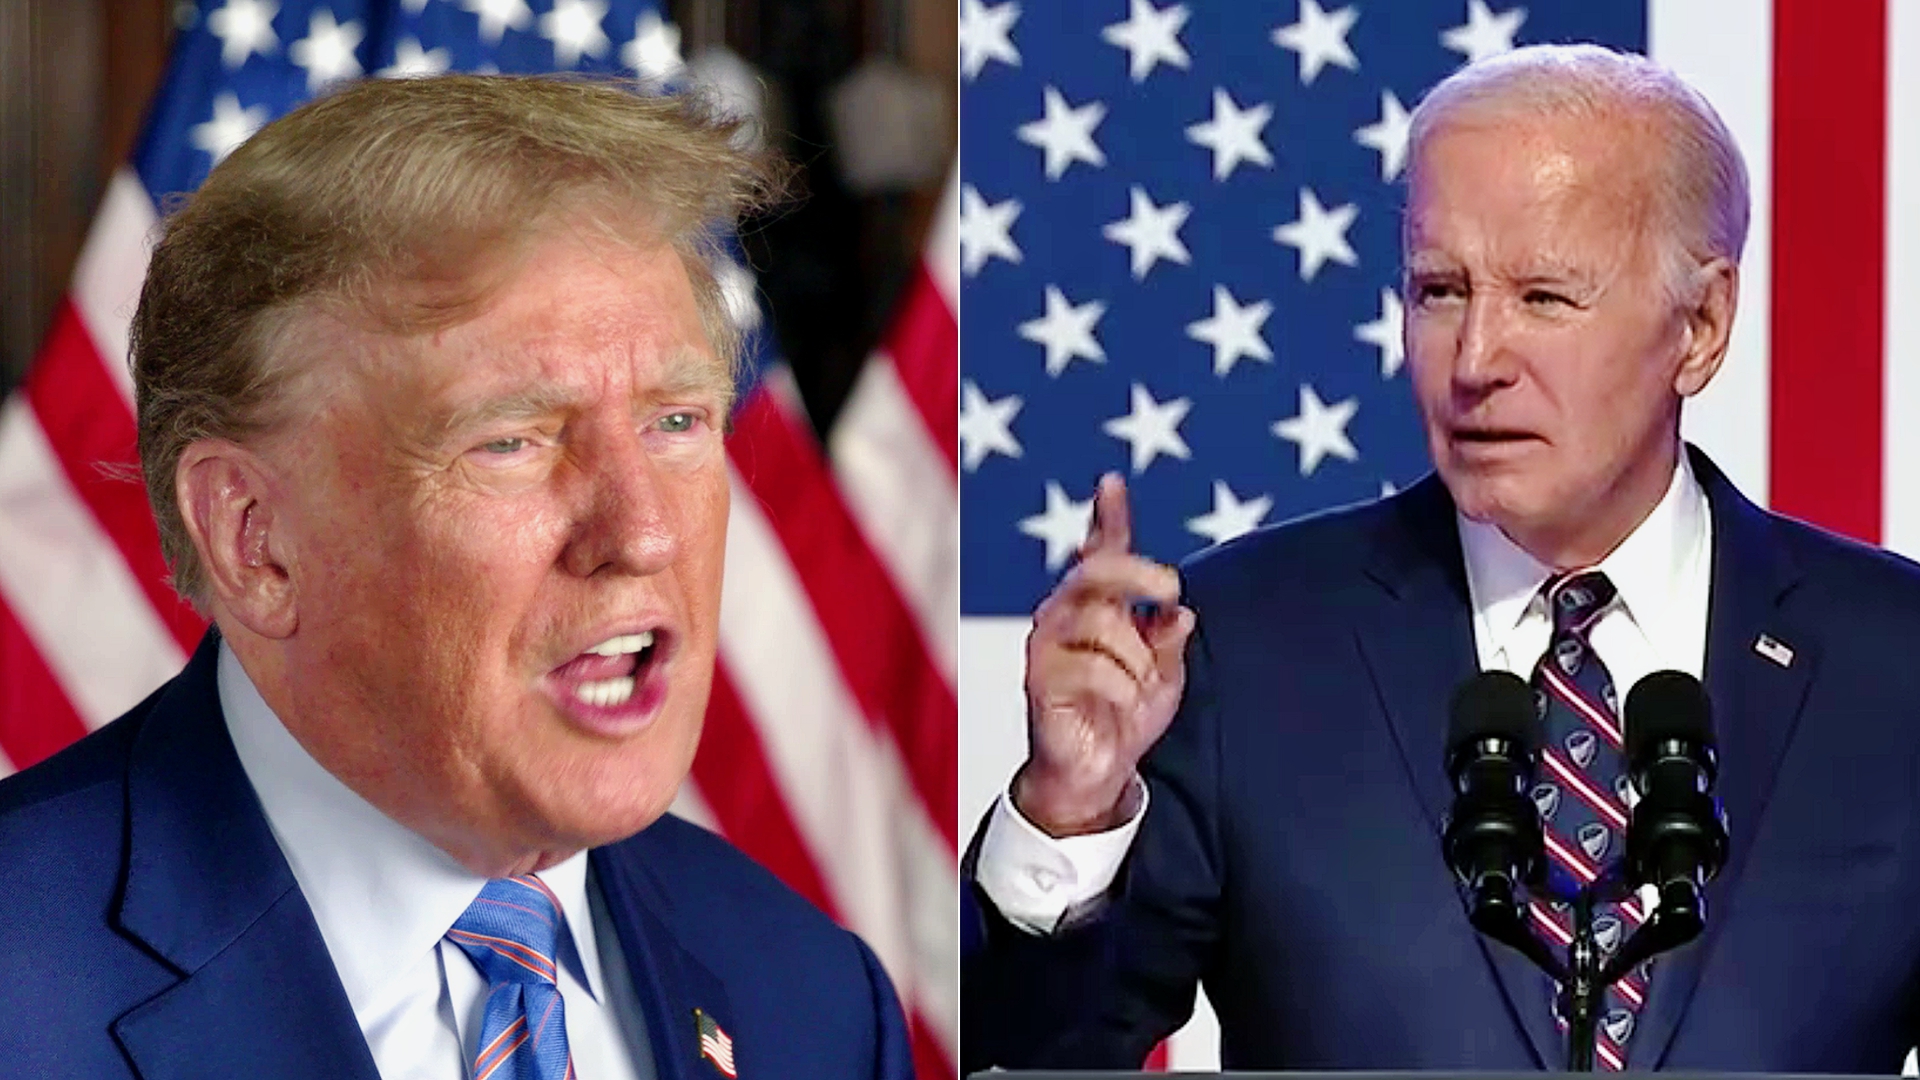 Trump Declares Surprise Third Debate on Fox News — Without Reply from Biden